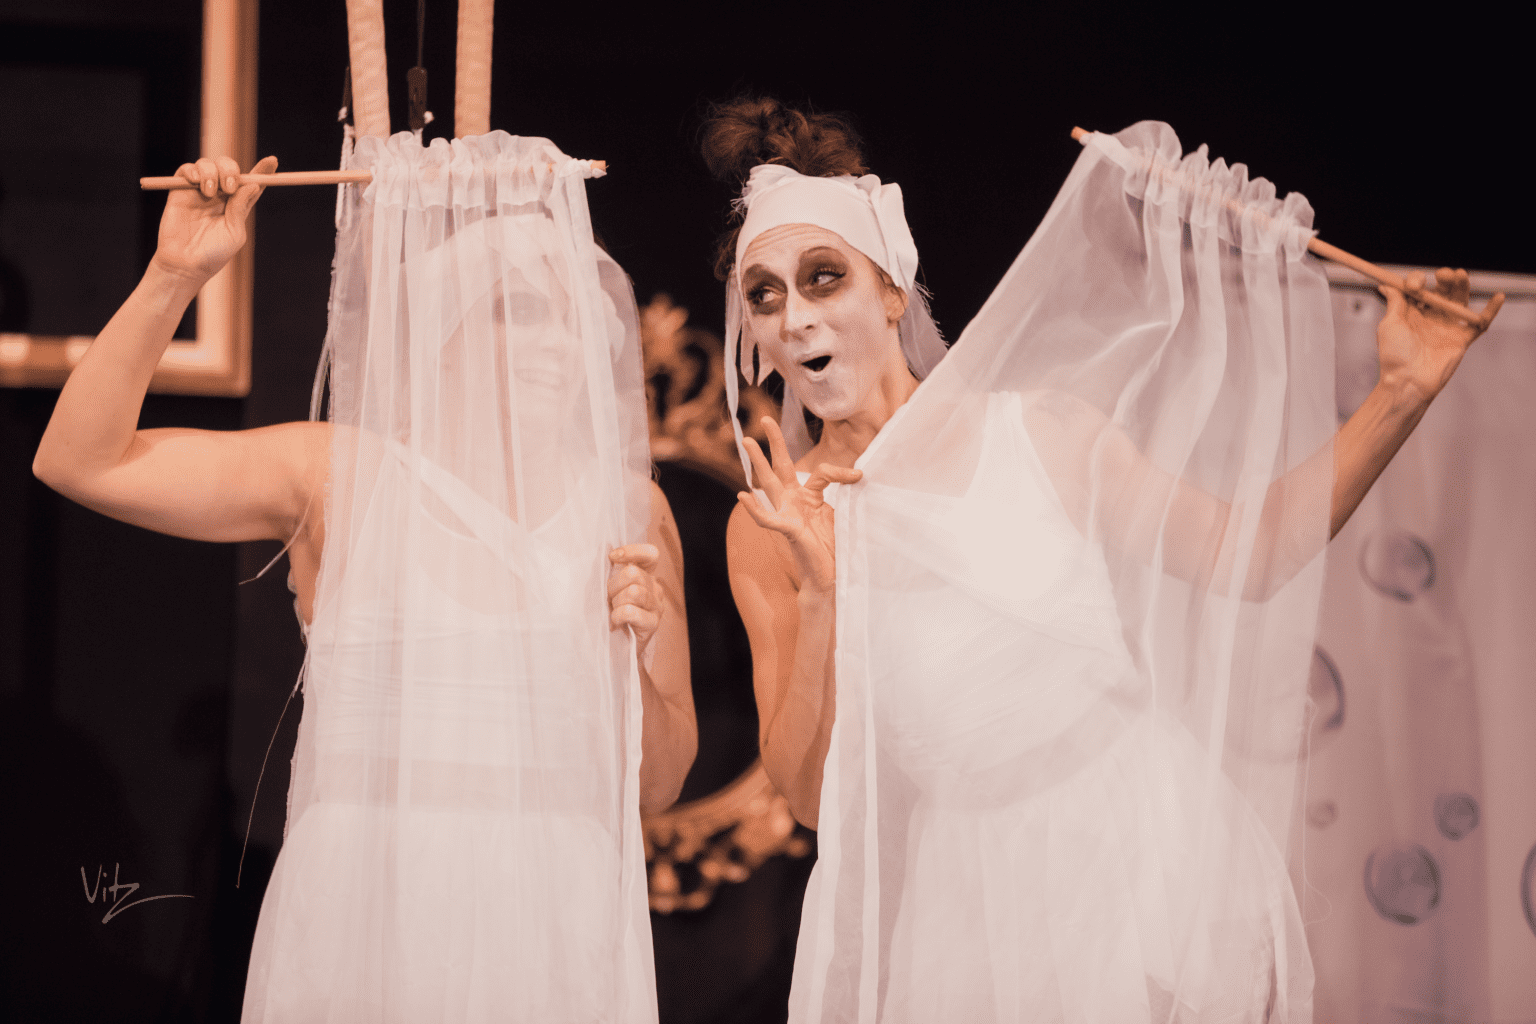 The Bellingham Circus Guild's “Beastly Frightful Unspeakably Spooky Circus of Doom” features performances Oct. 28–31 at the Cirque Lab. Expect tricksters